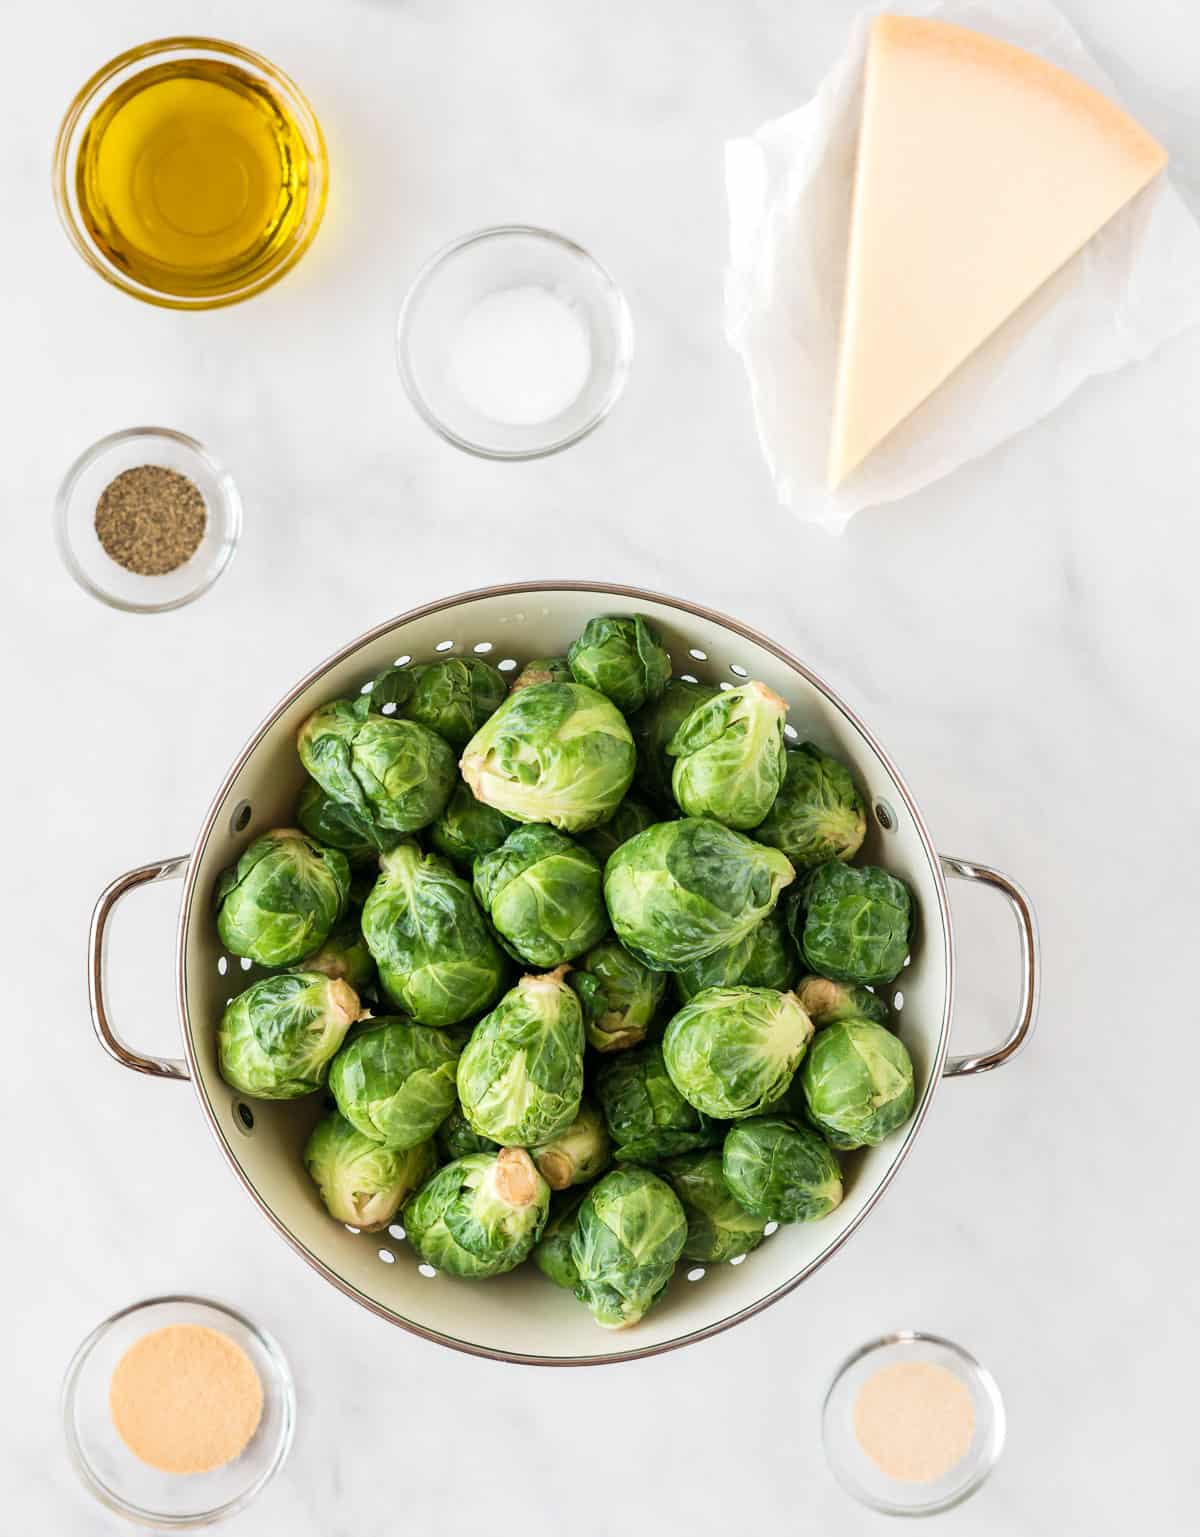 ingredients needed to make parmesan brussels sprouts